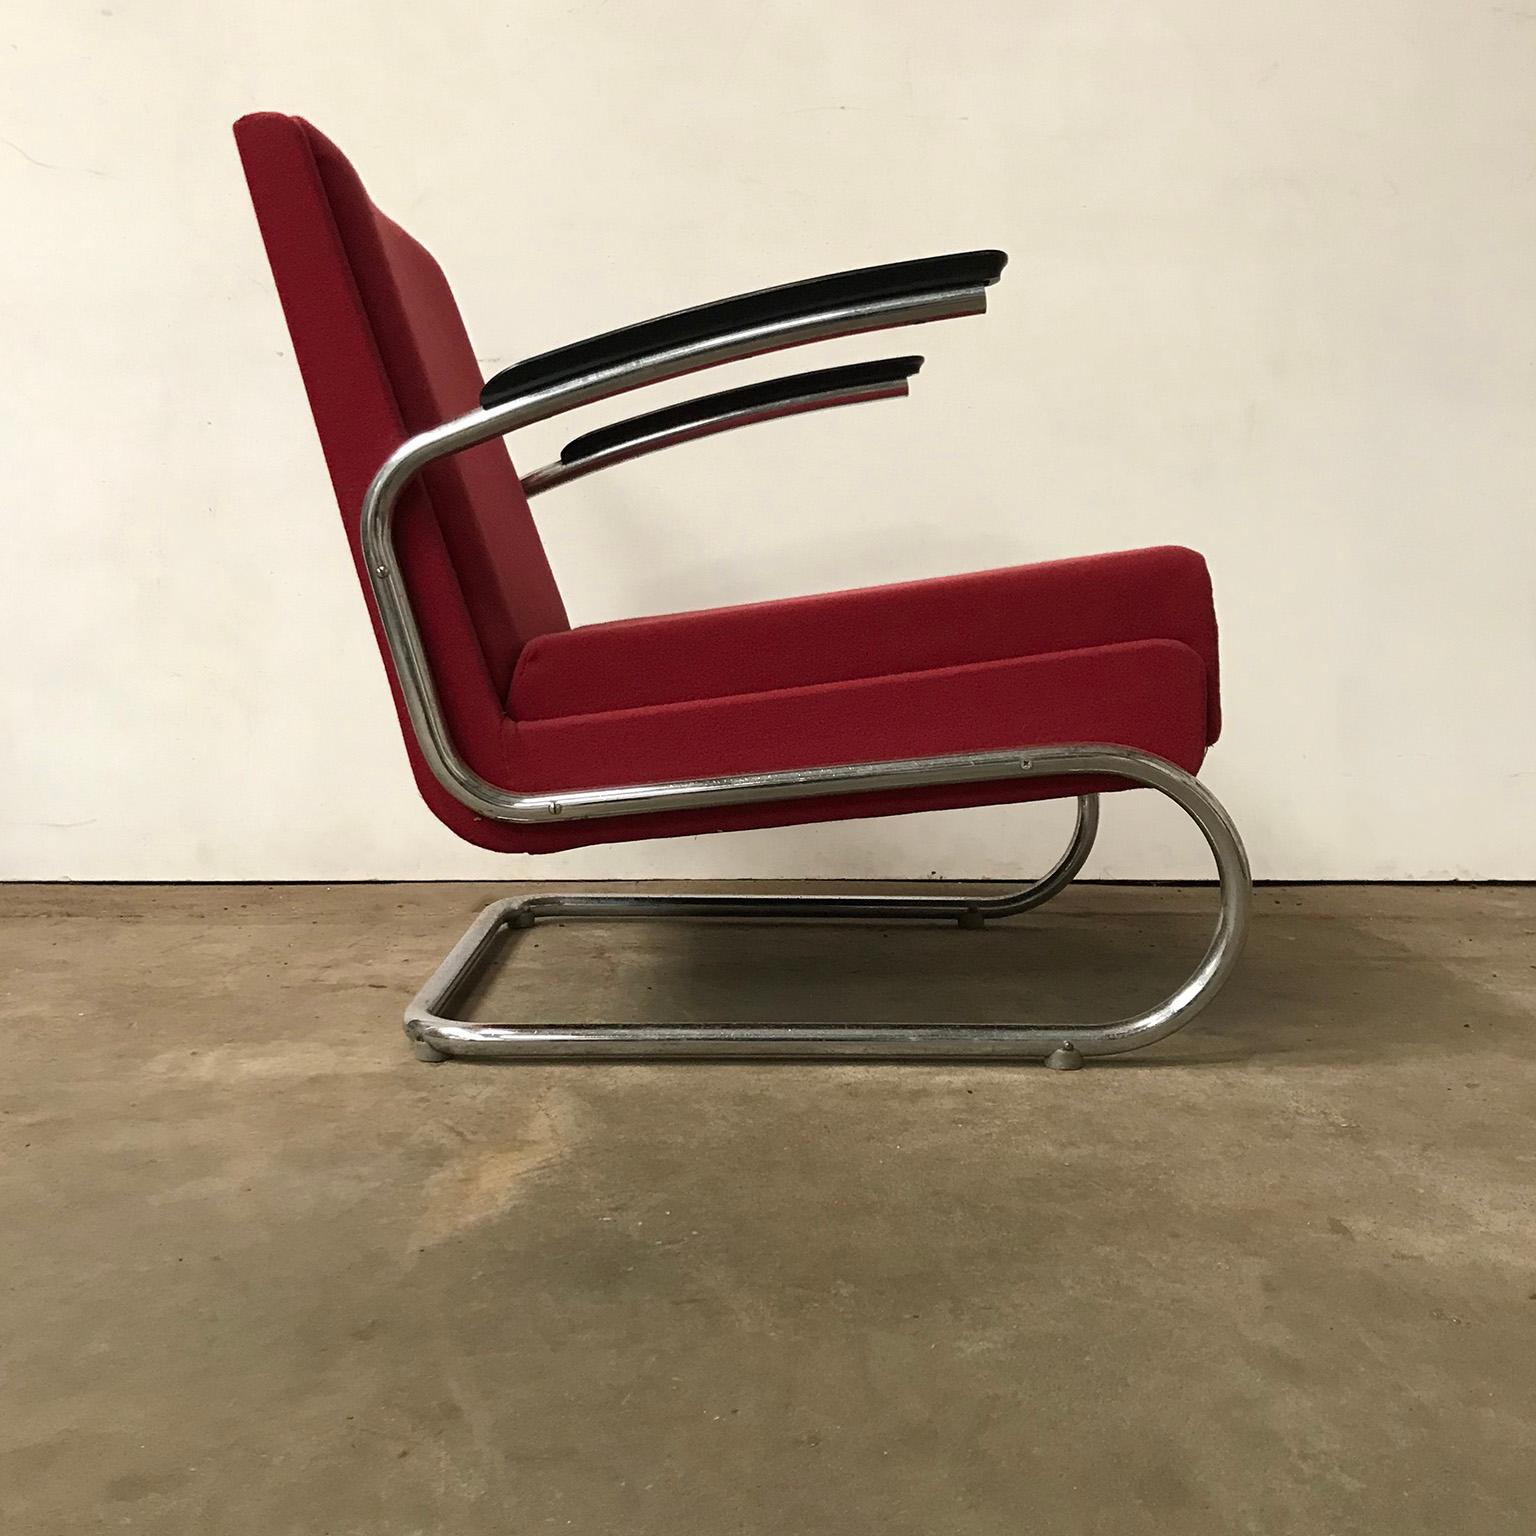 Industrial Dutch Tubular Easy Chair in Burgundy Red and Black Armrests, circa 1930